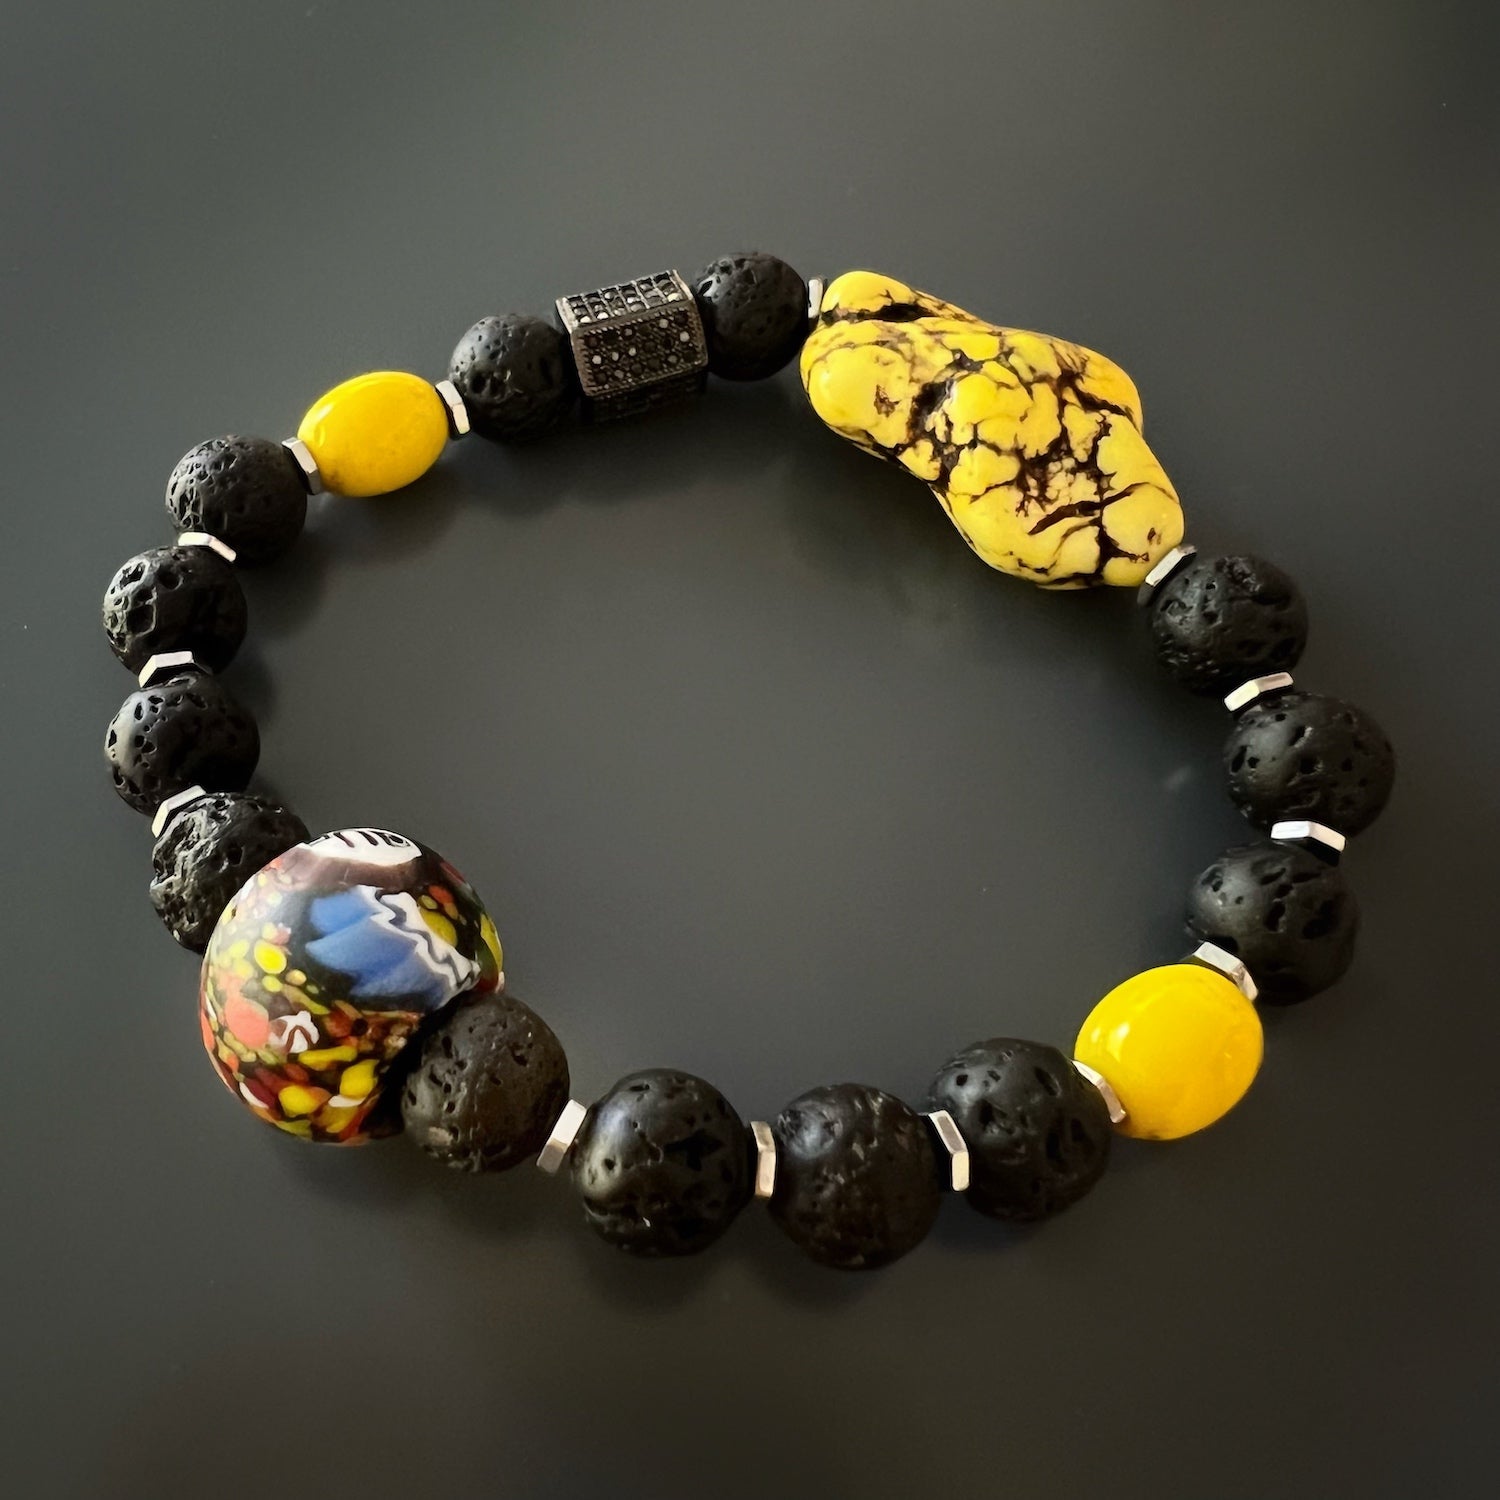 Raw yellow turquoise large bead serving as the focal point of the African Yellow Turquoise Bracelet, displaying its natural beauty and unique color variations.